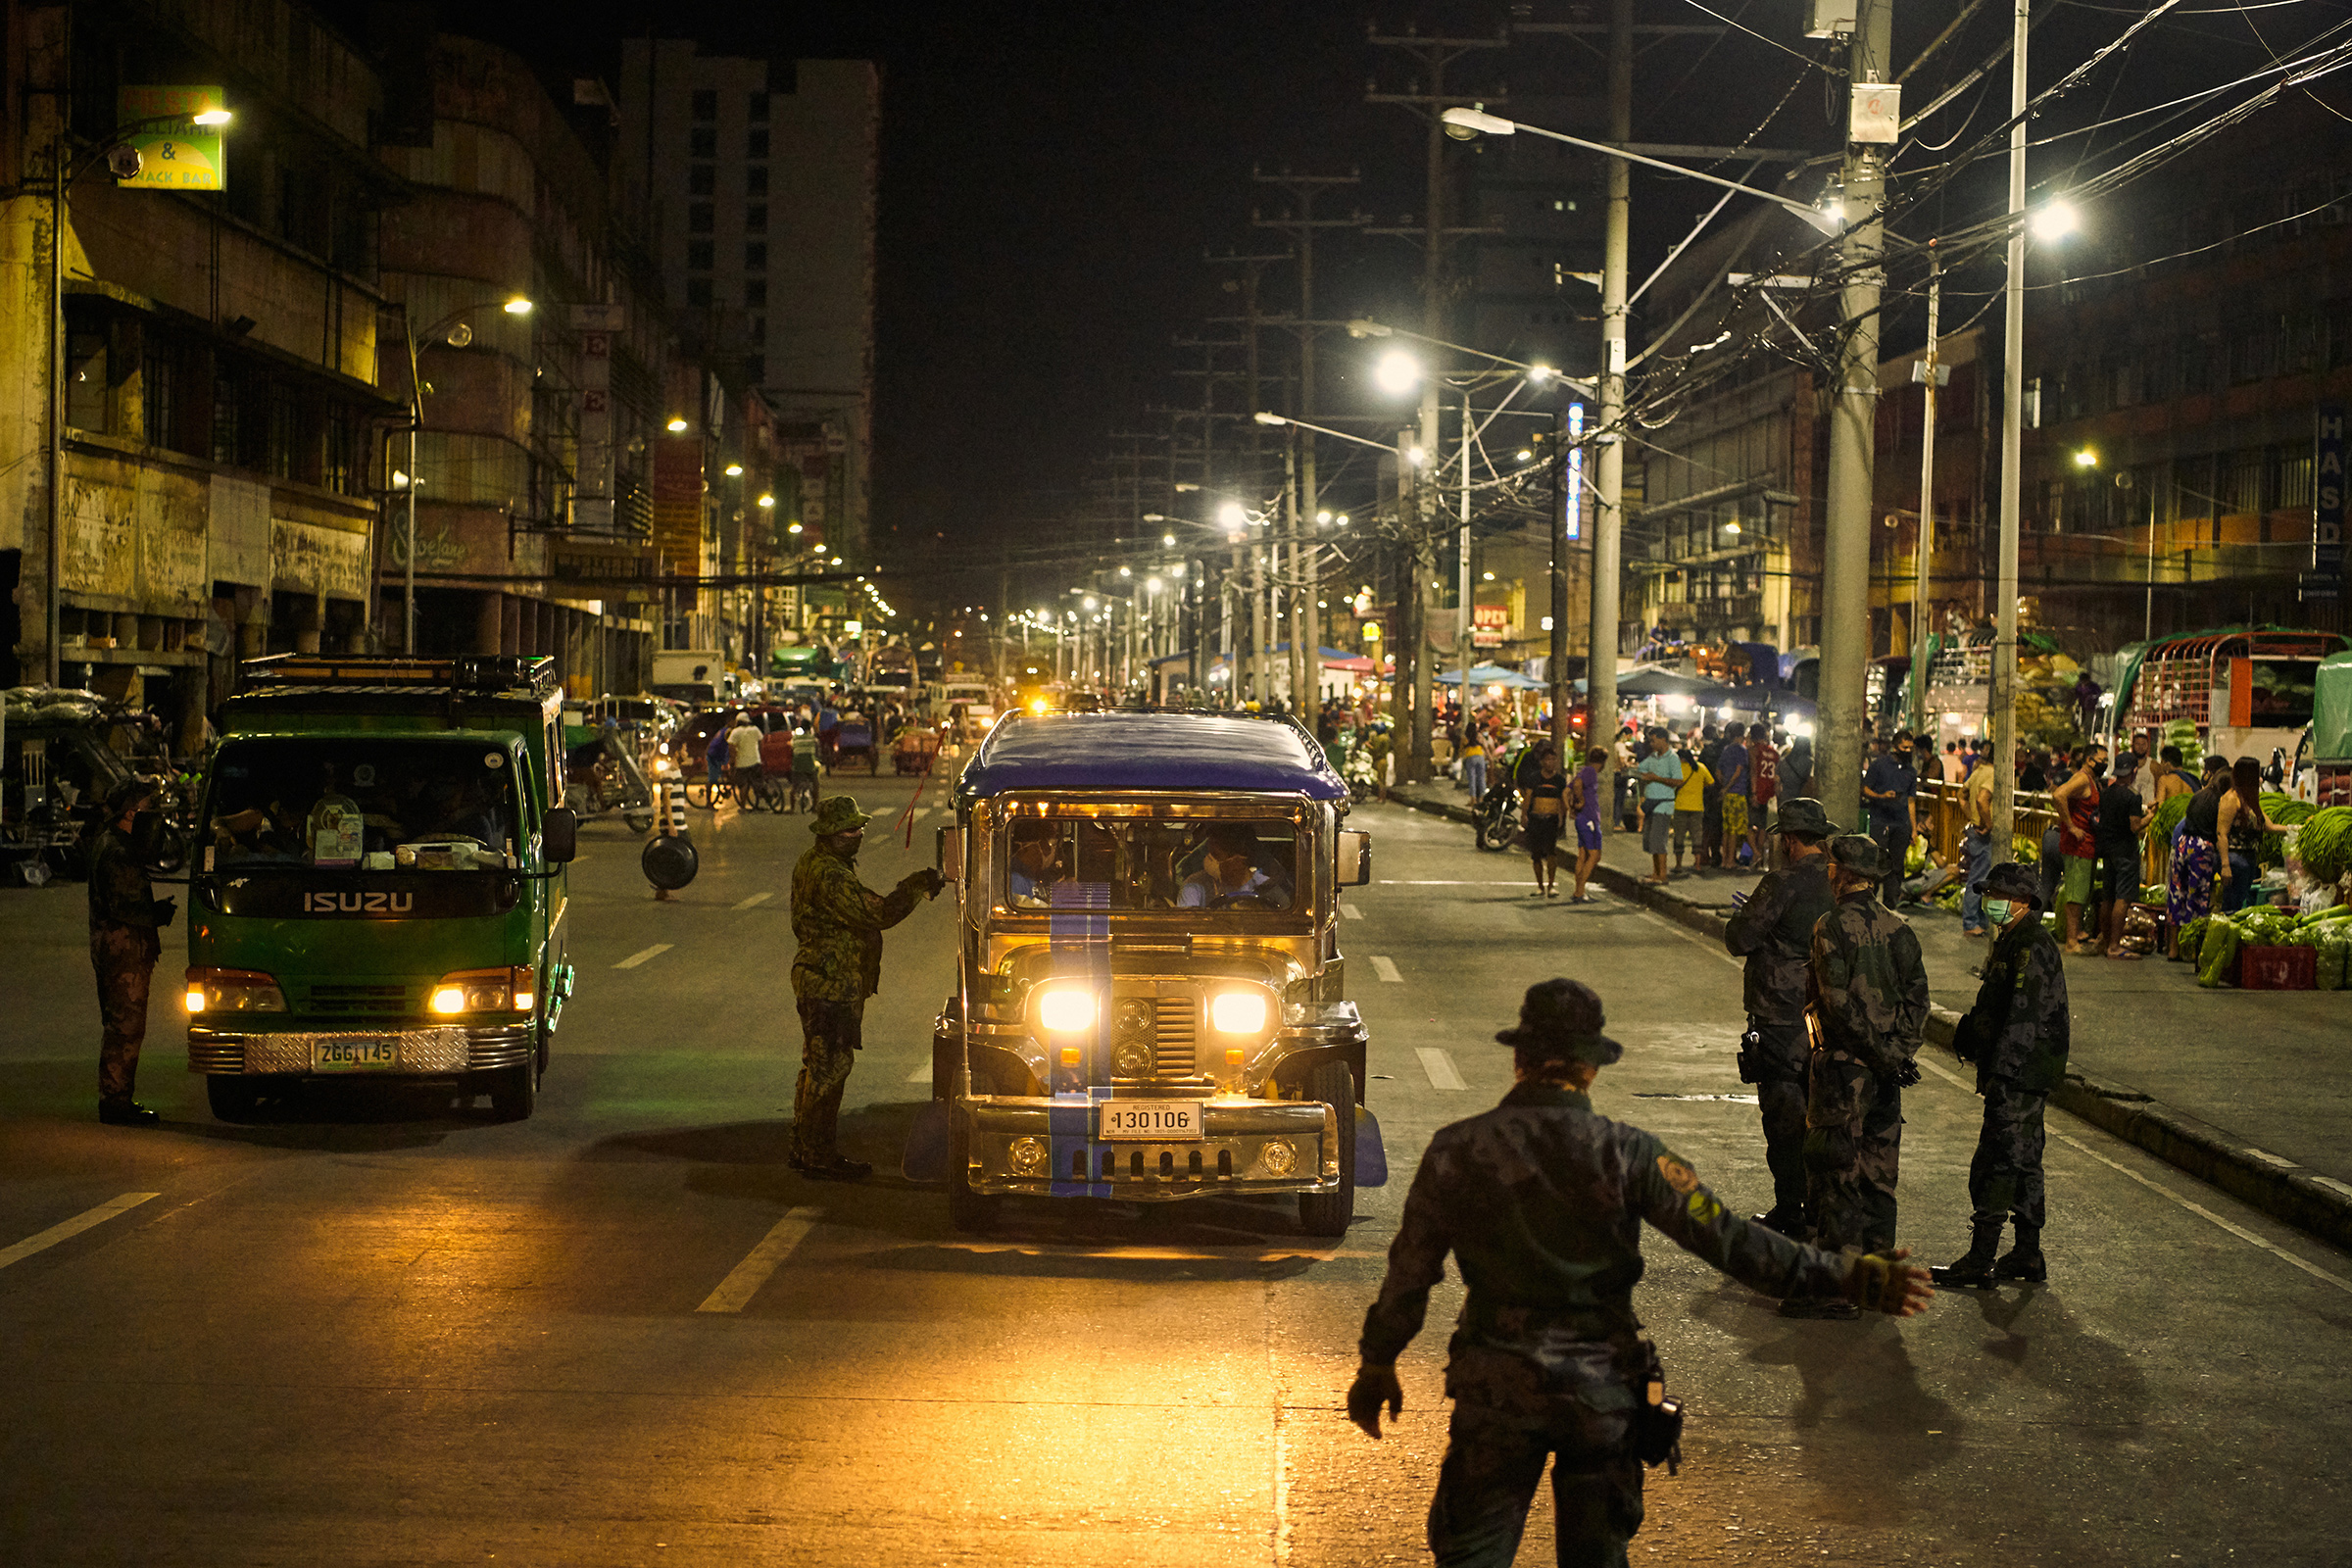 Police check vehicles in Manila during the coronavirus pandemic on March 18, 2020. (Jes Aznar—The New York Times/Redux)